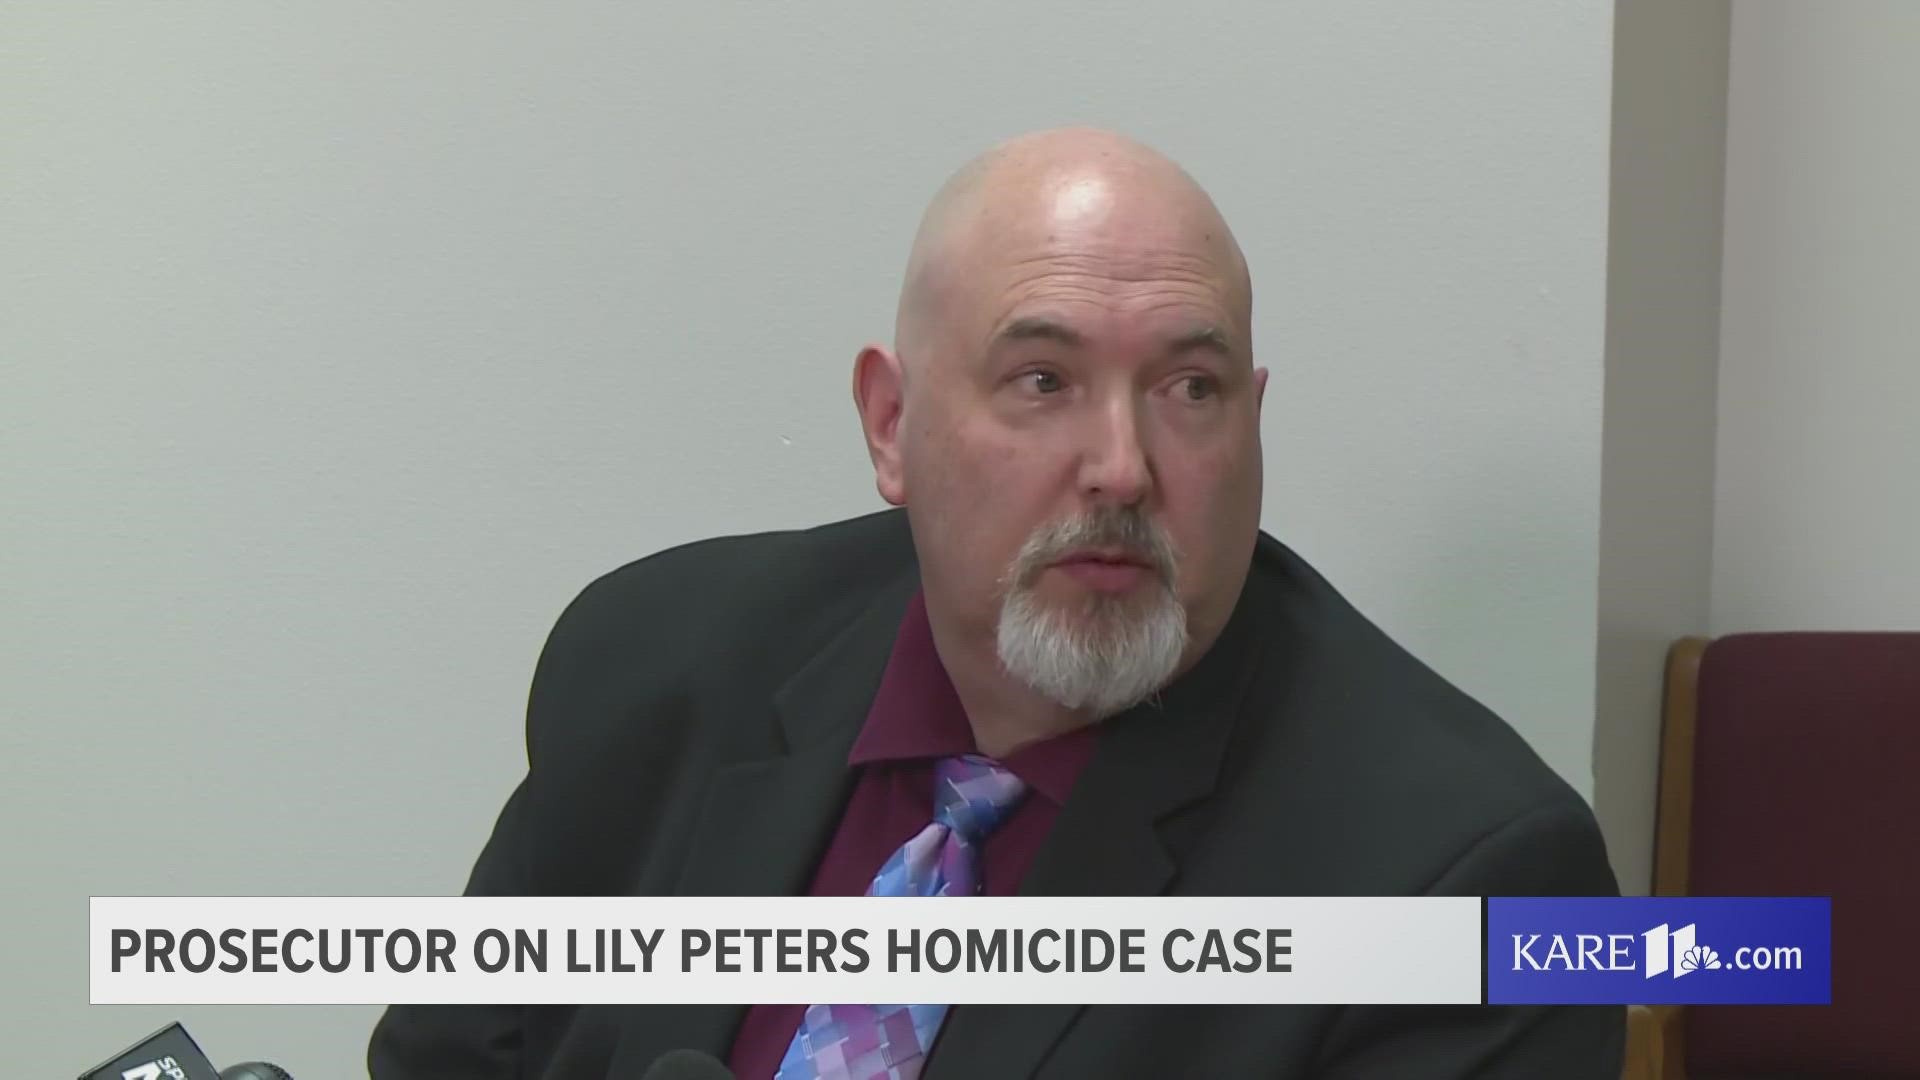 Chippewa County Attorney Wade Newell briefed reporters on the felony charges against the juvenile suspect in the death of 10-year-old Lily Peters.